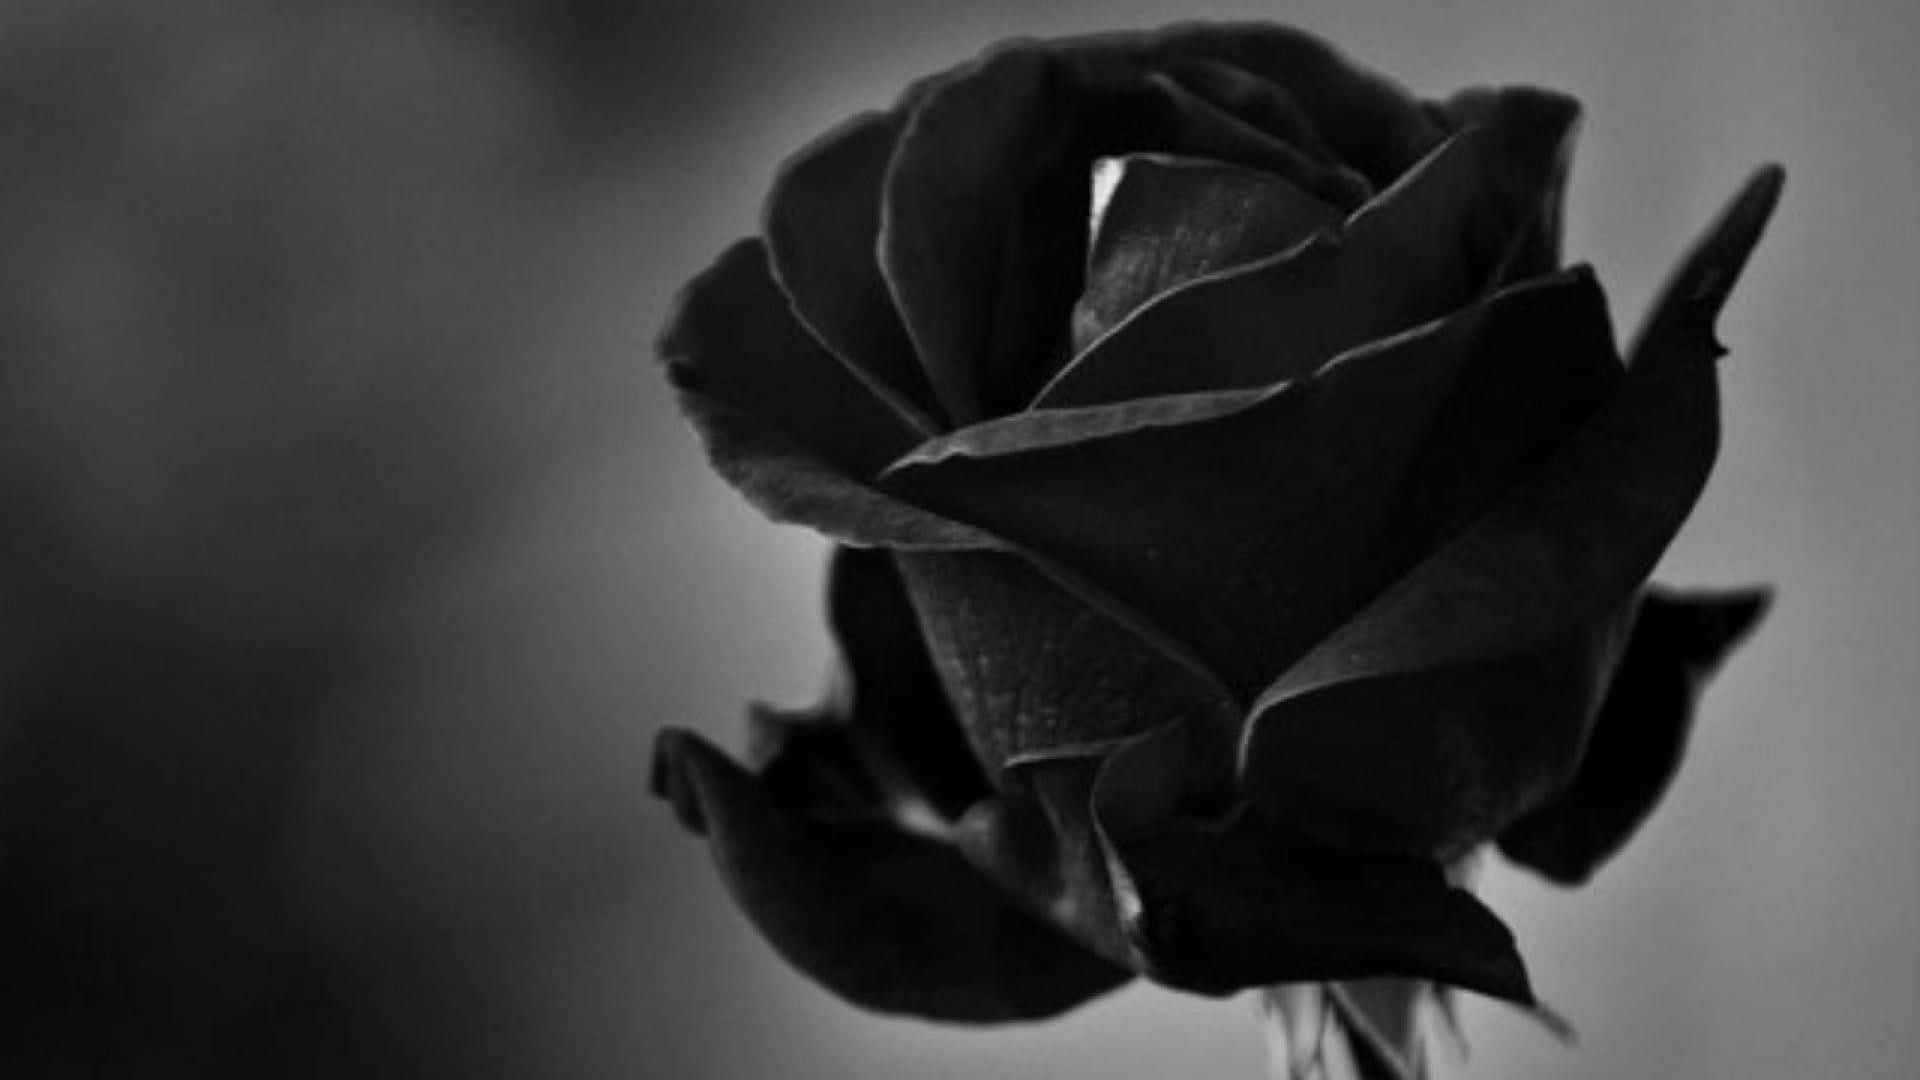 A romantic gesture of love with a Black Rose